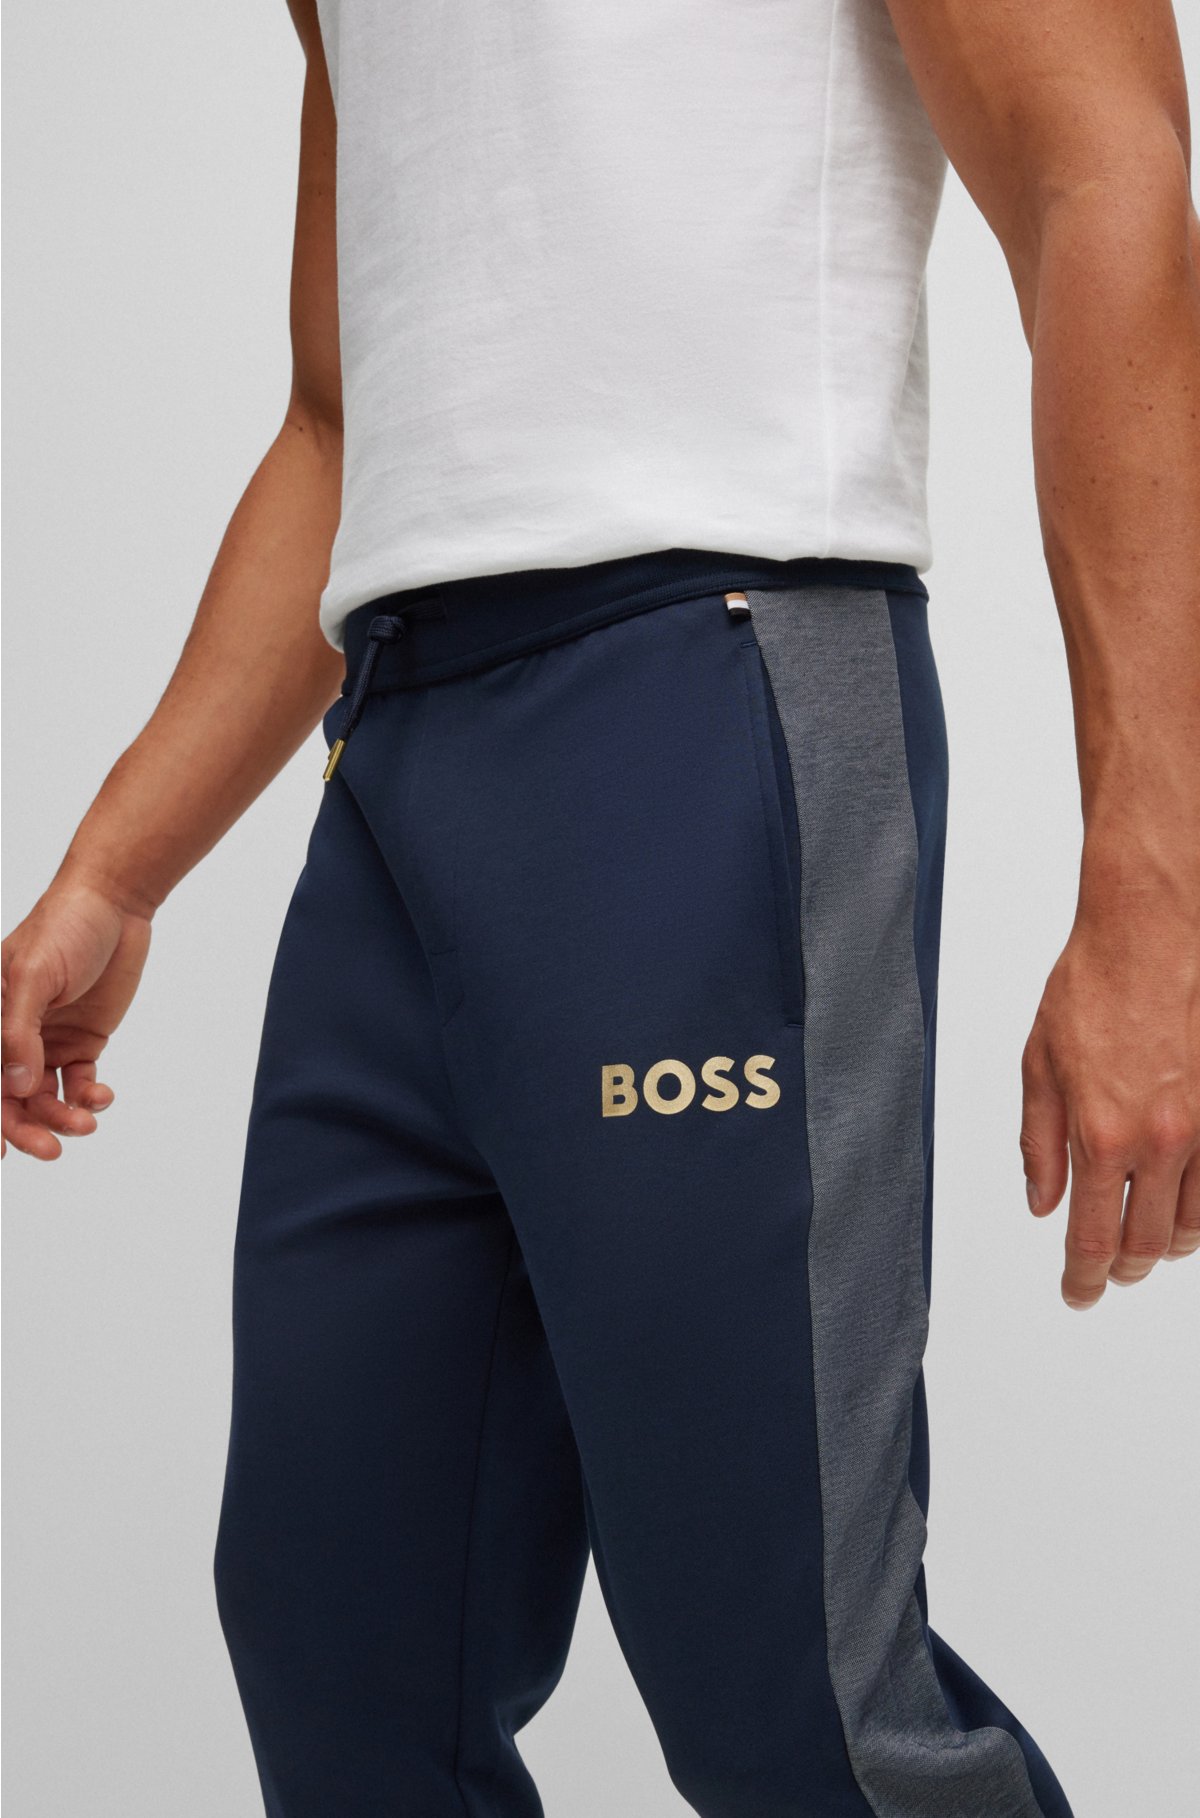 Sweatpants embroidered with logo - BOSS